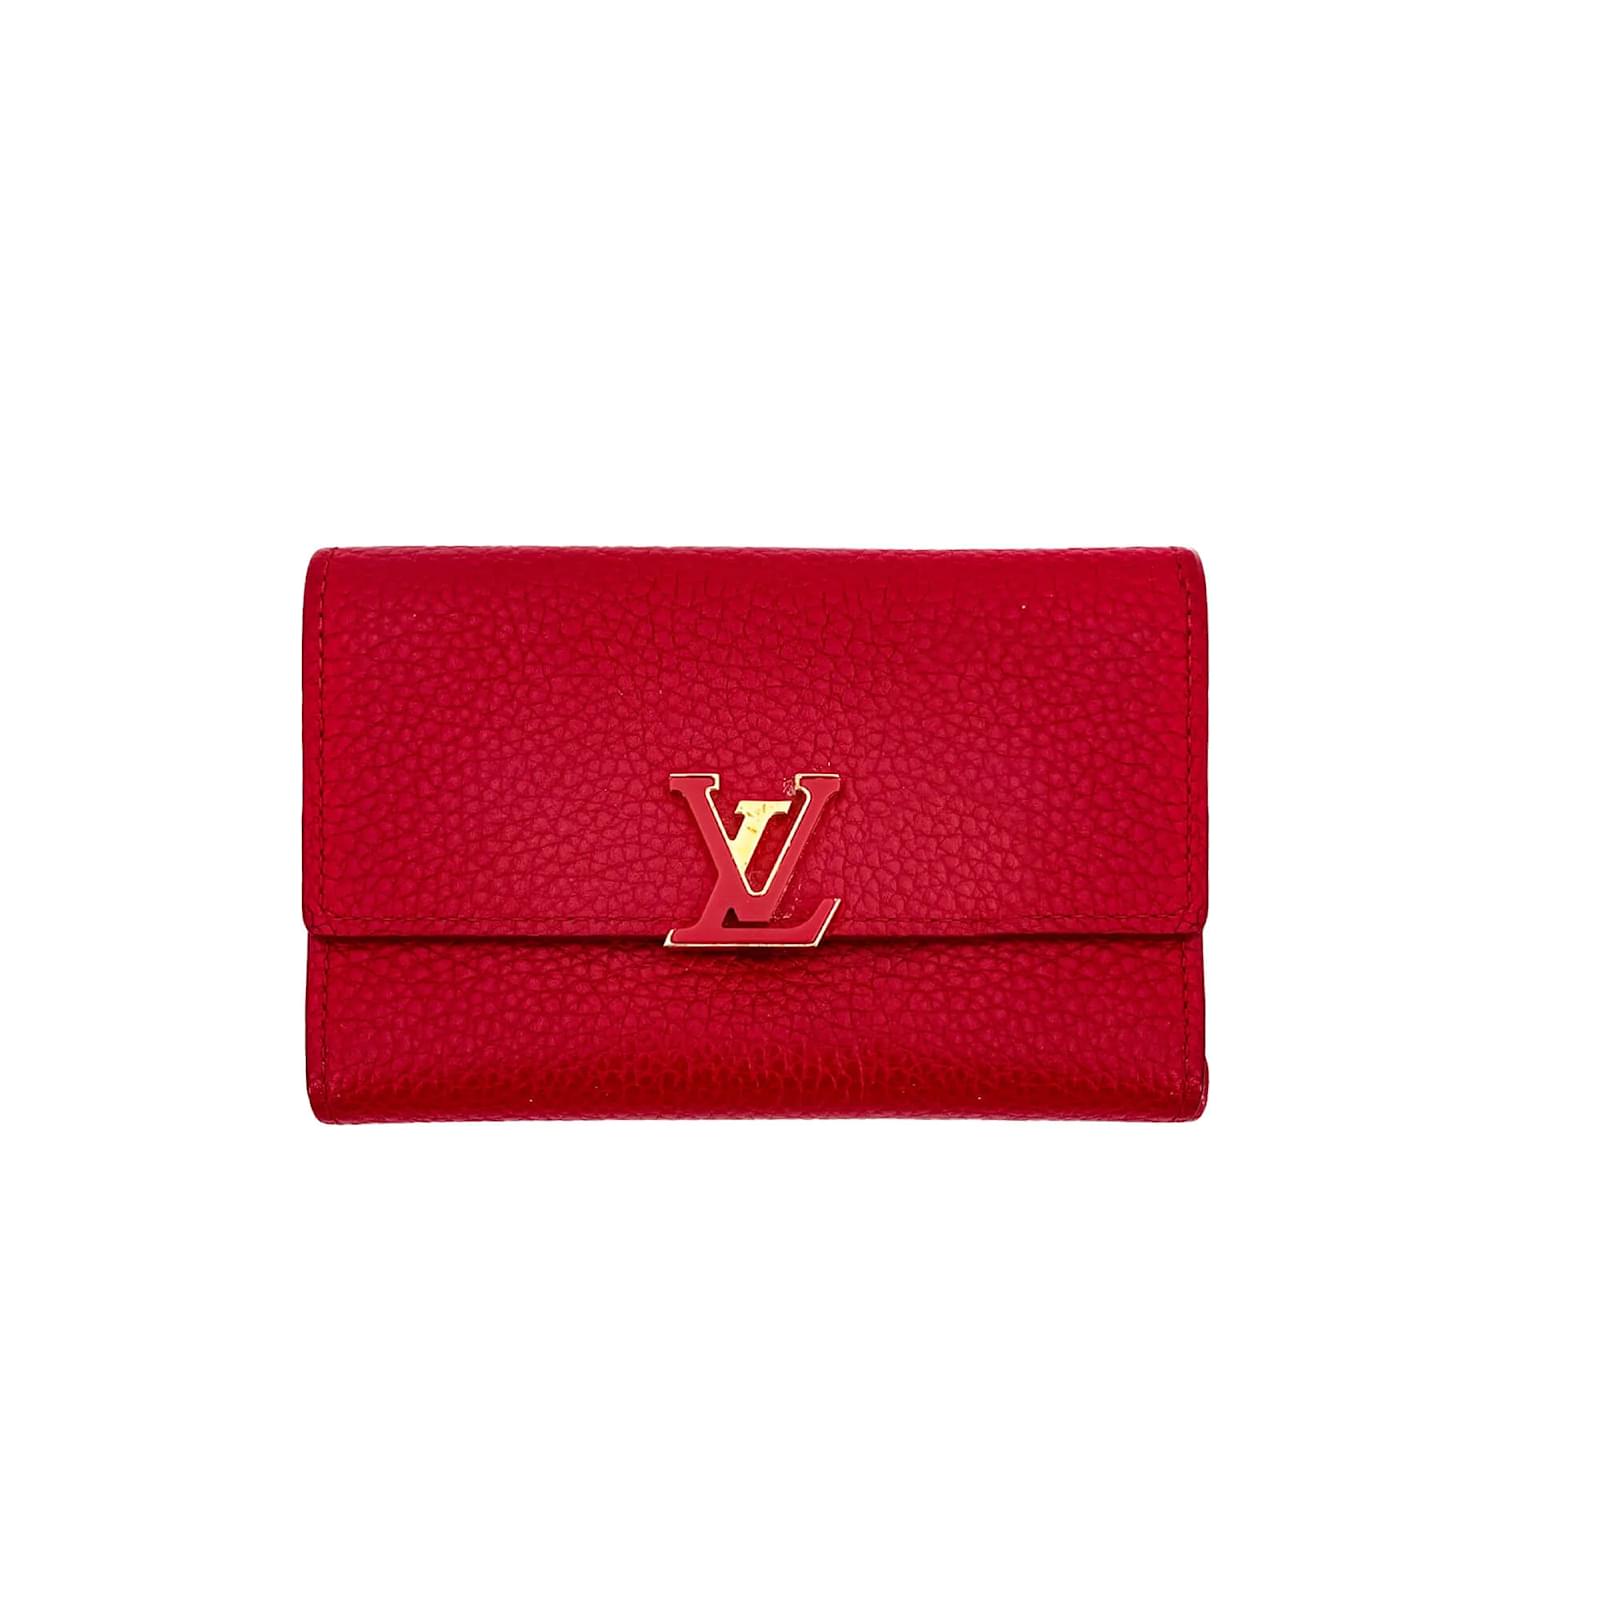 Louis Vuitton LV SHW Capucines Wallet Calfskin Leather Red